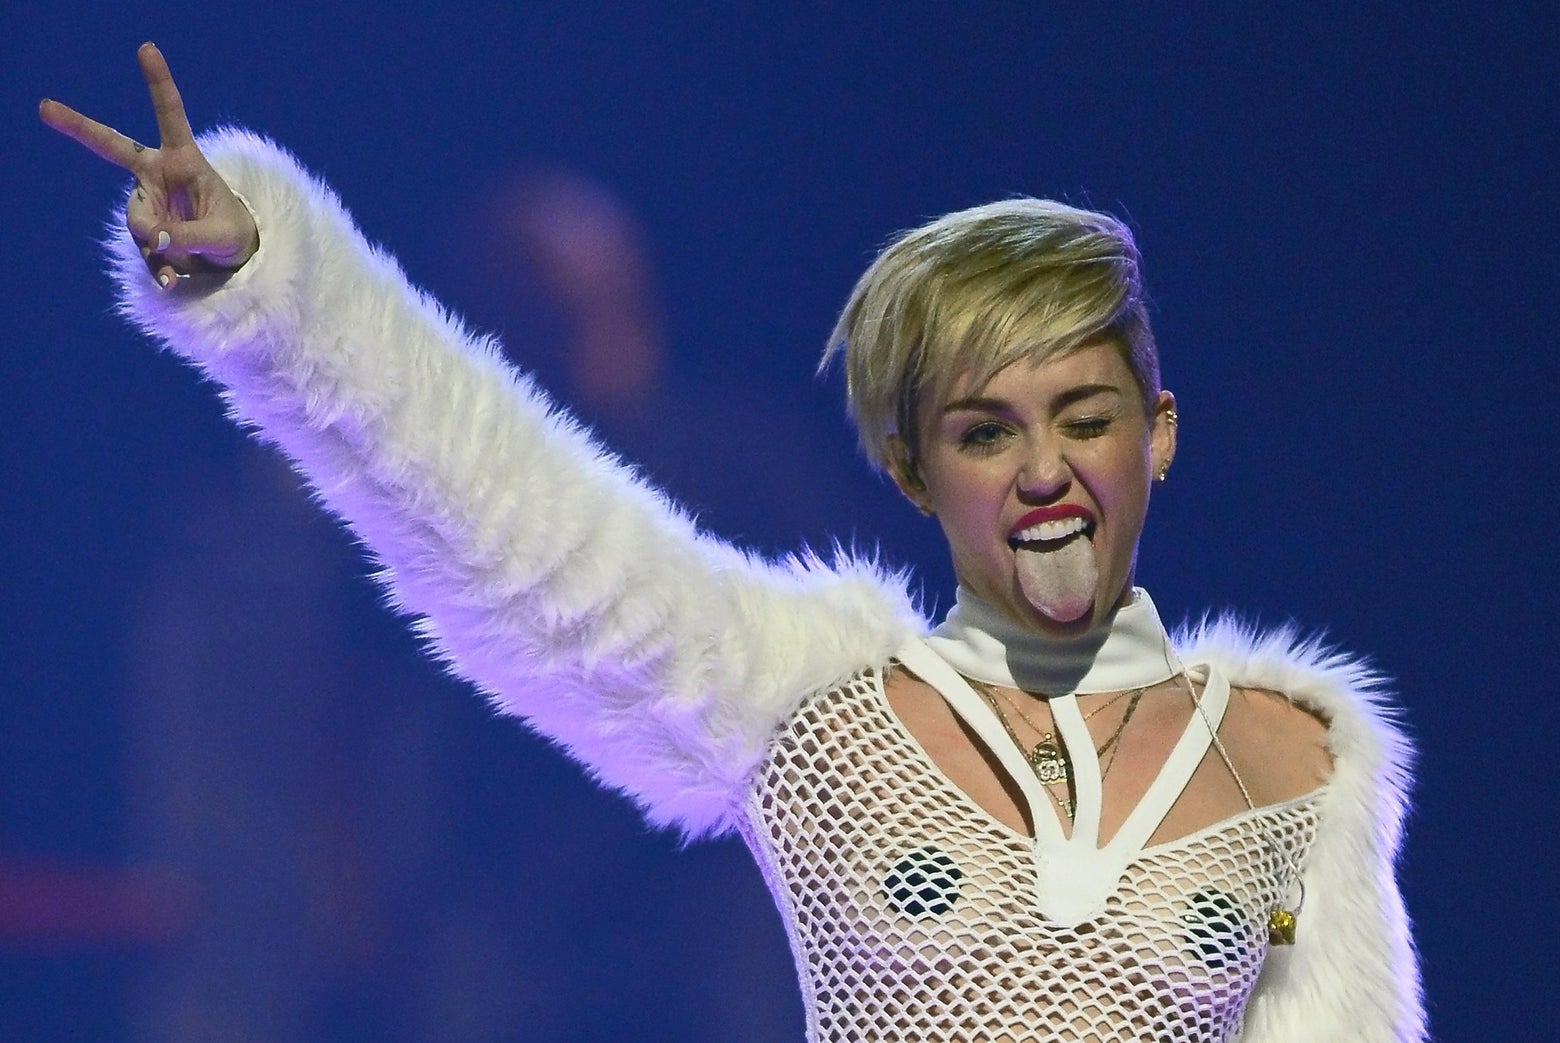 Fuck Miley - Sinead O'Connor writes an open letter to Miley Cyrus and says all the right  things.